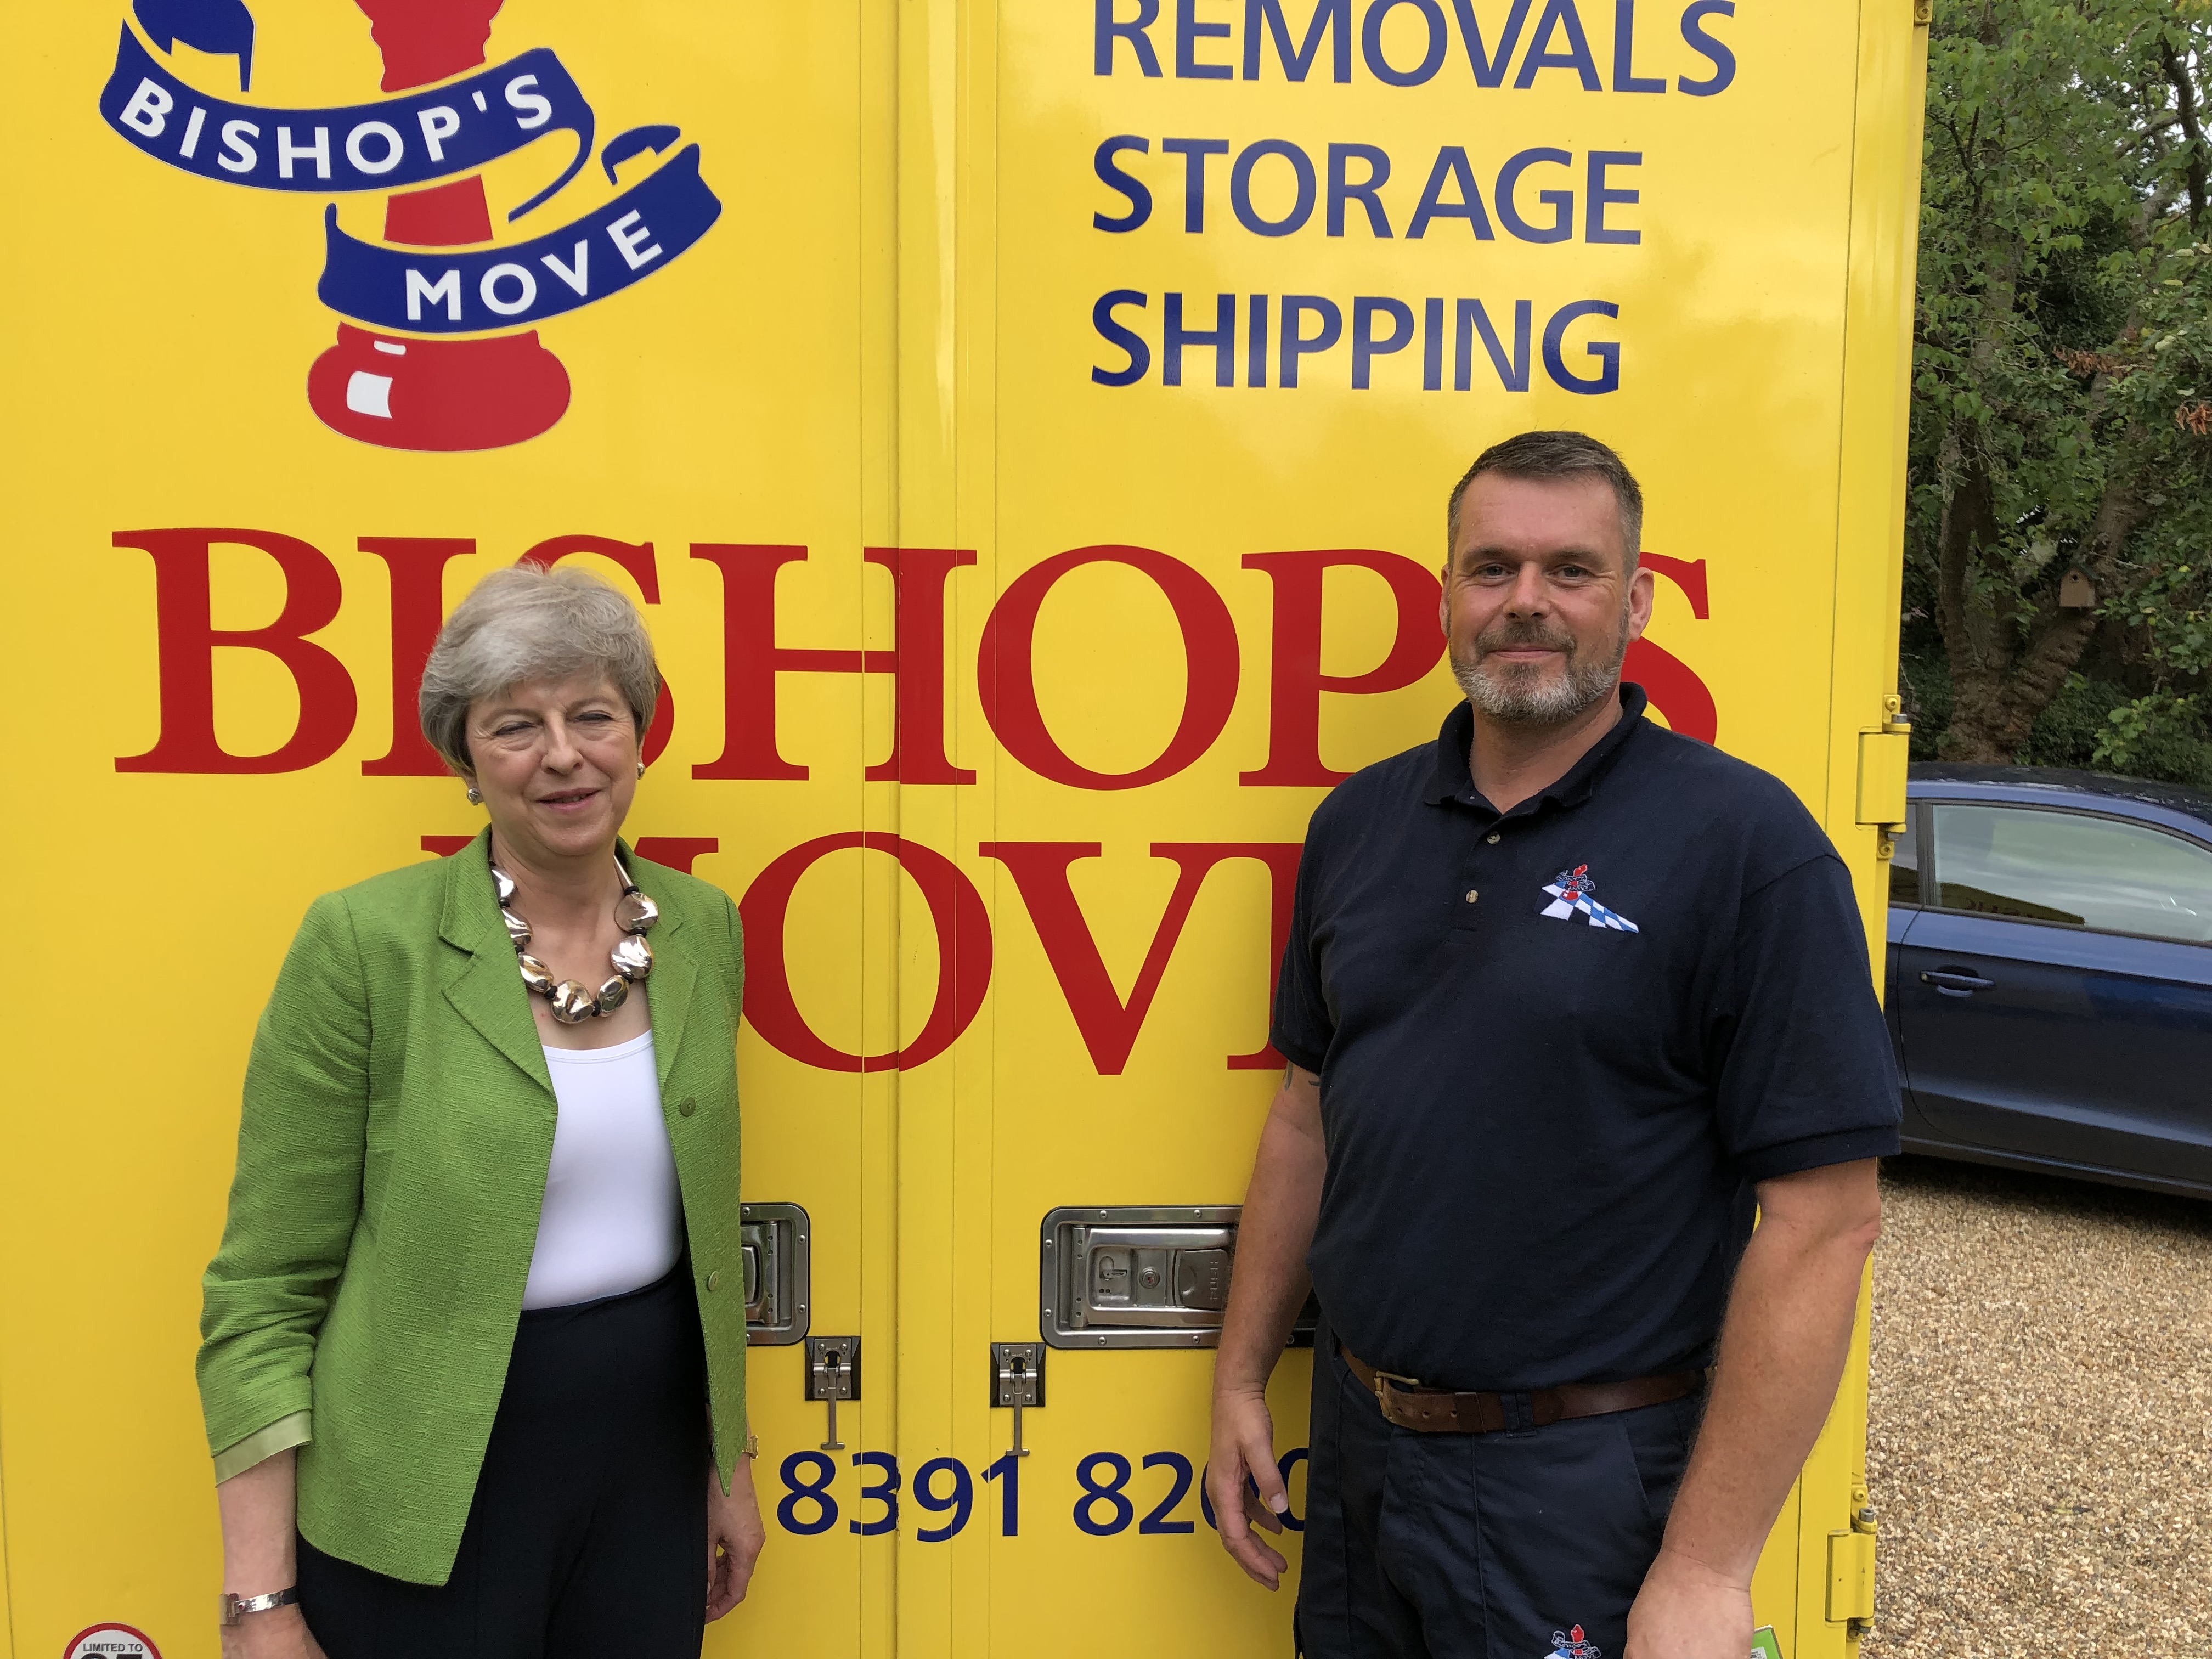 Bishop's foreman Mark Allen with Theresa May